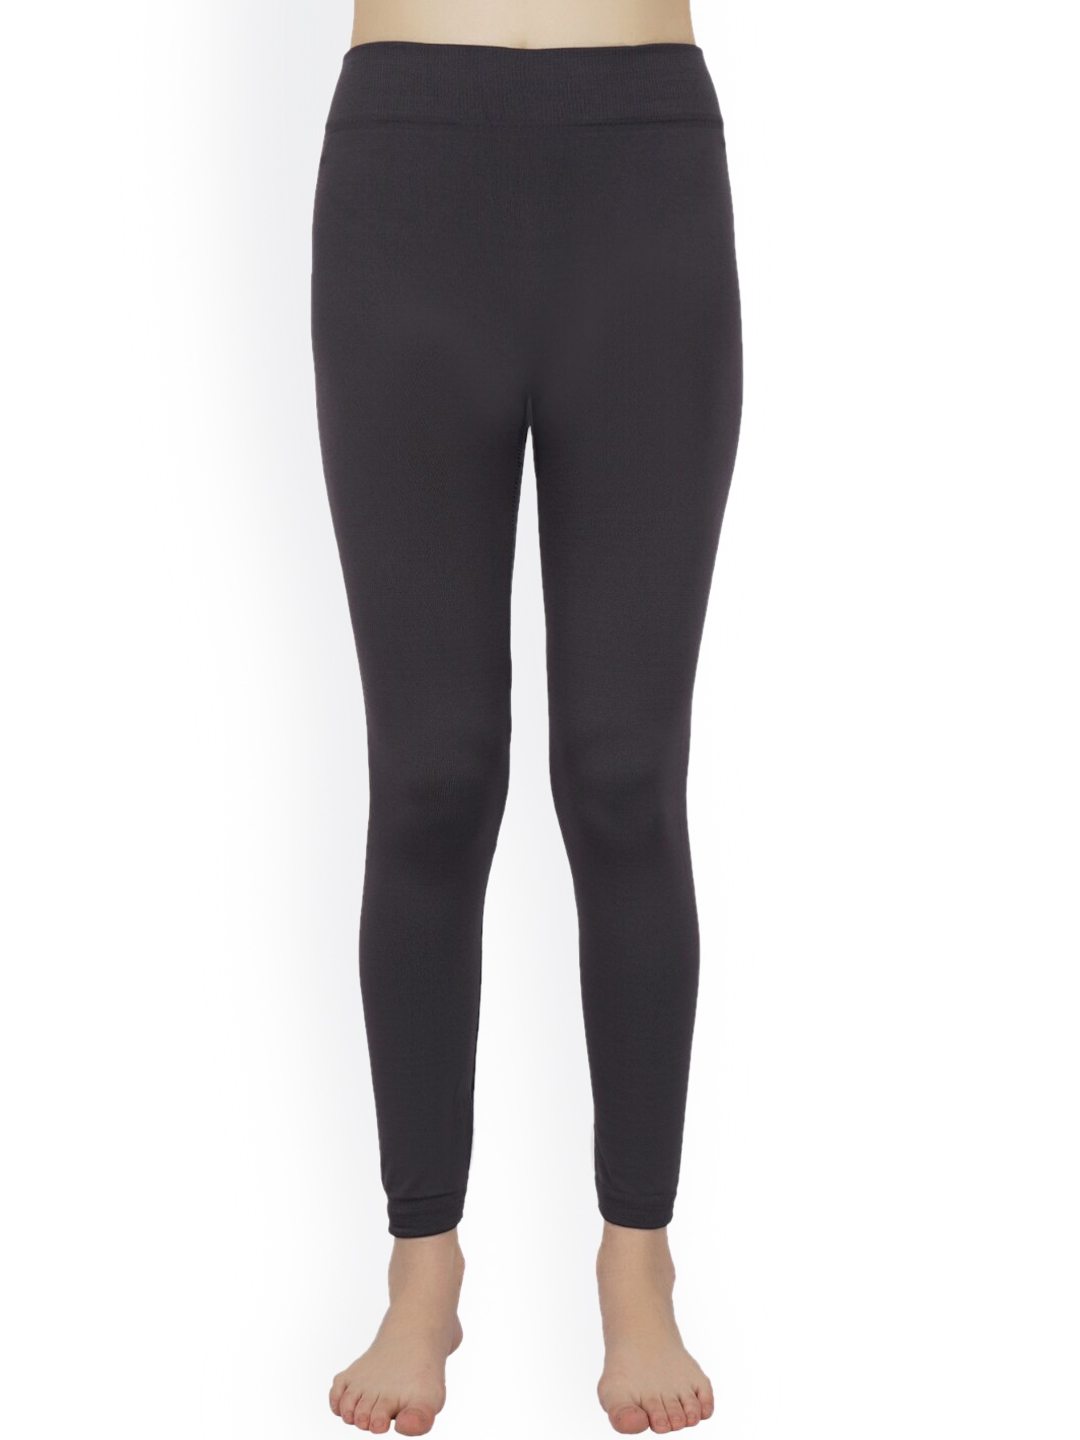 High Waist Fleece Thermal Legging, Casual Wear, Skin Fit at Rs 400